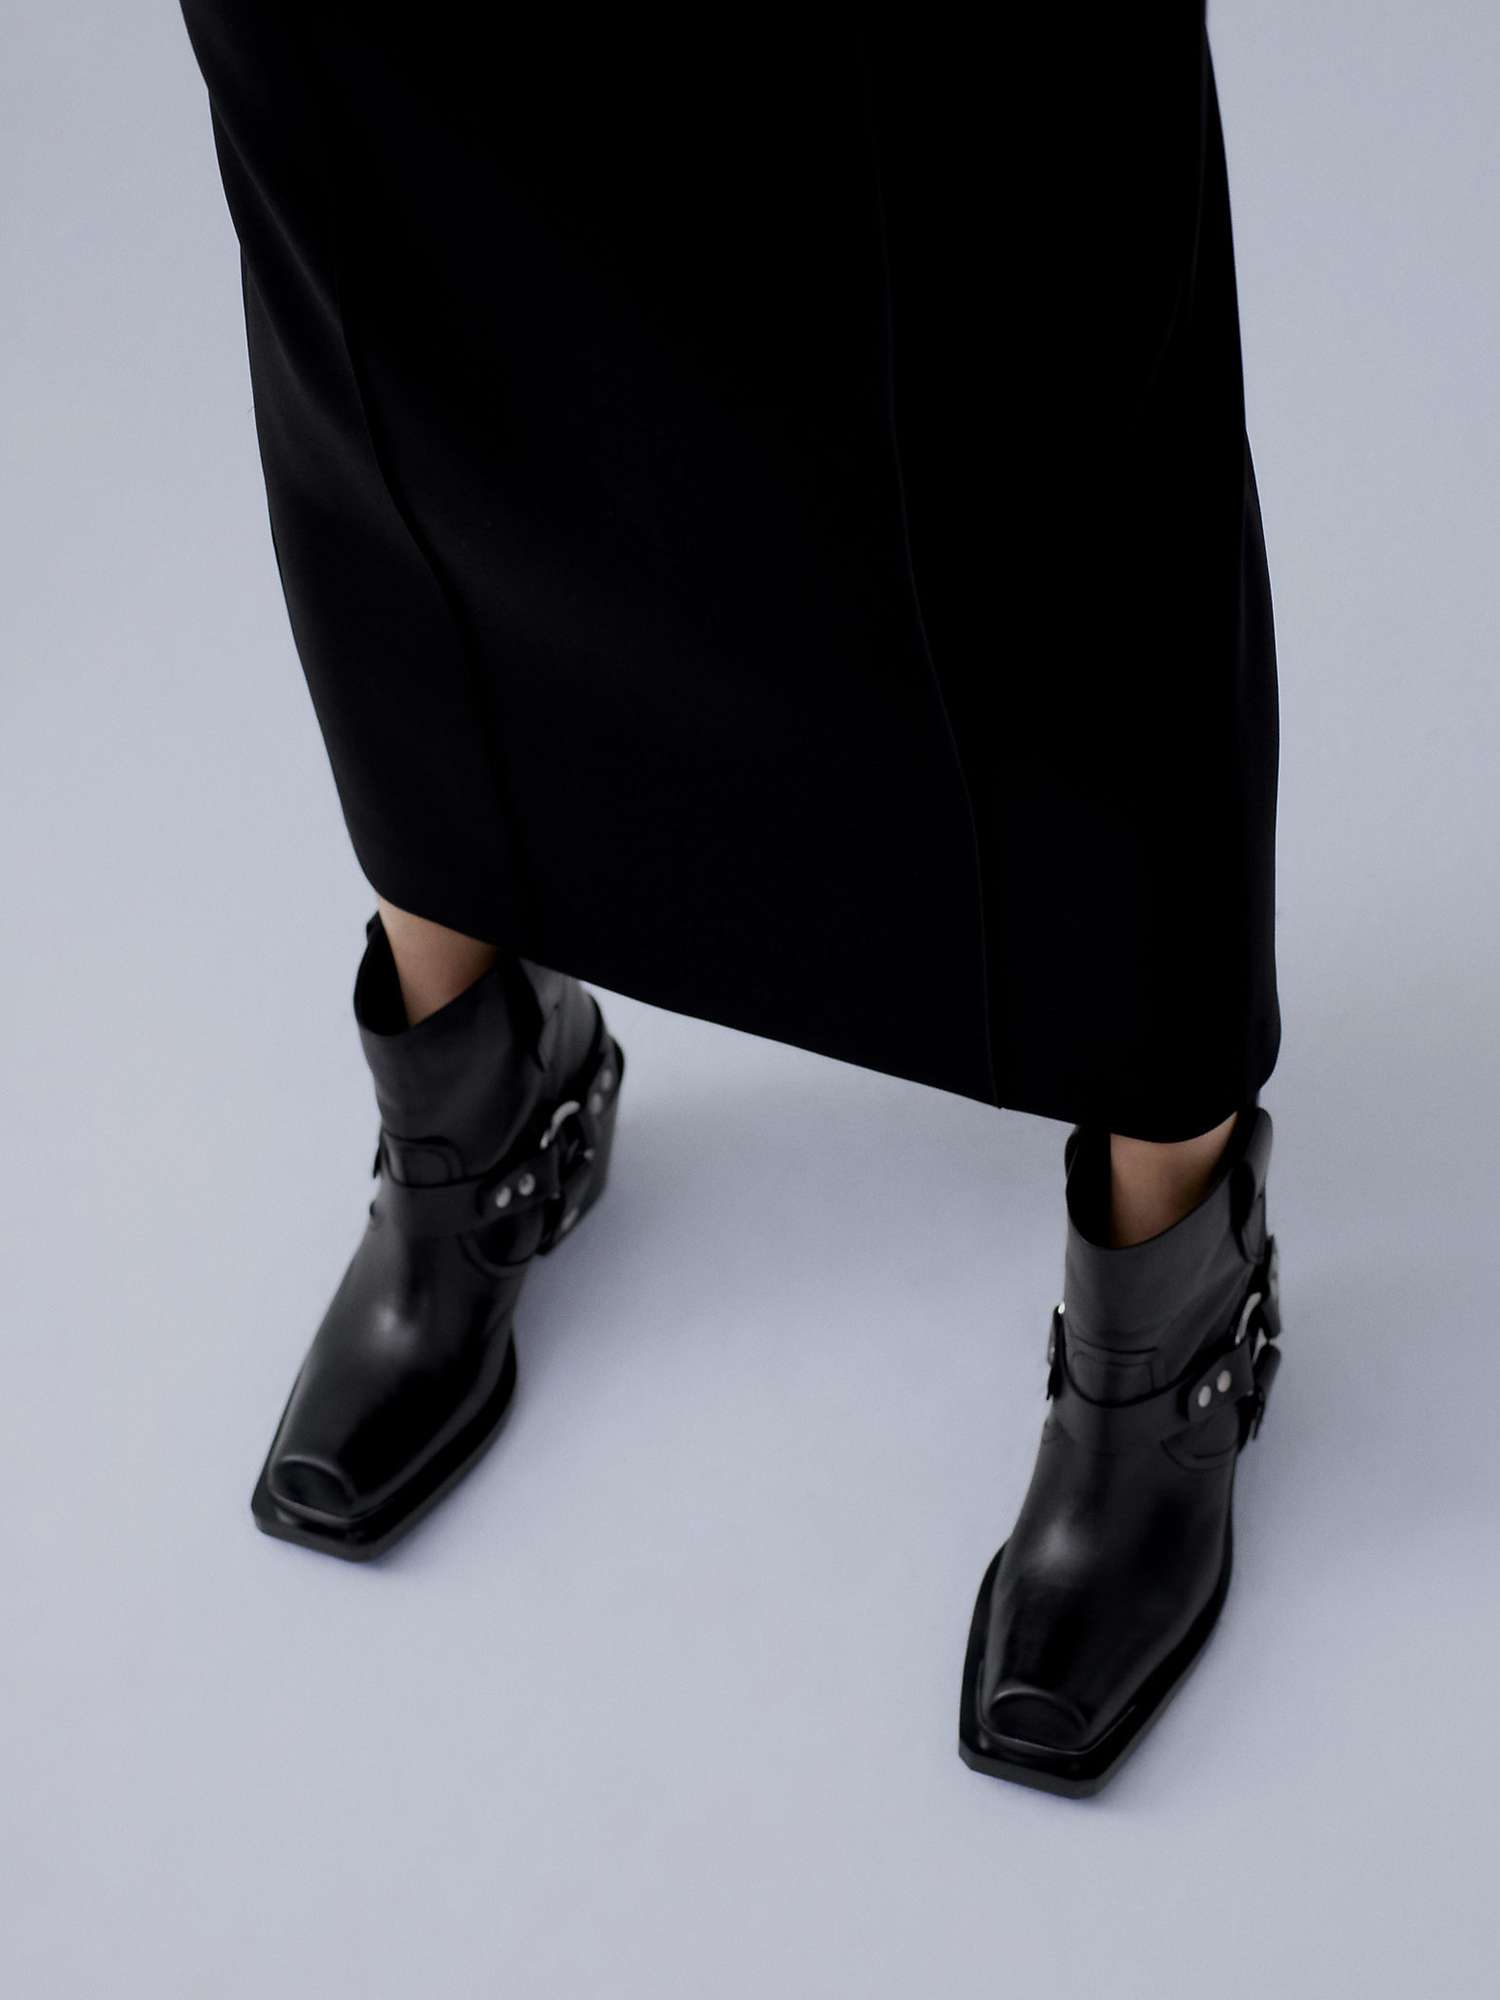 Buy Mango Peter Leather Buckle Detail Ankle Boots, Black Online at johnlewis.com